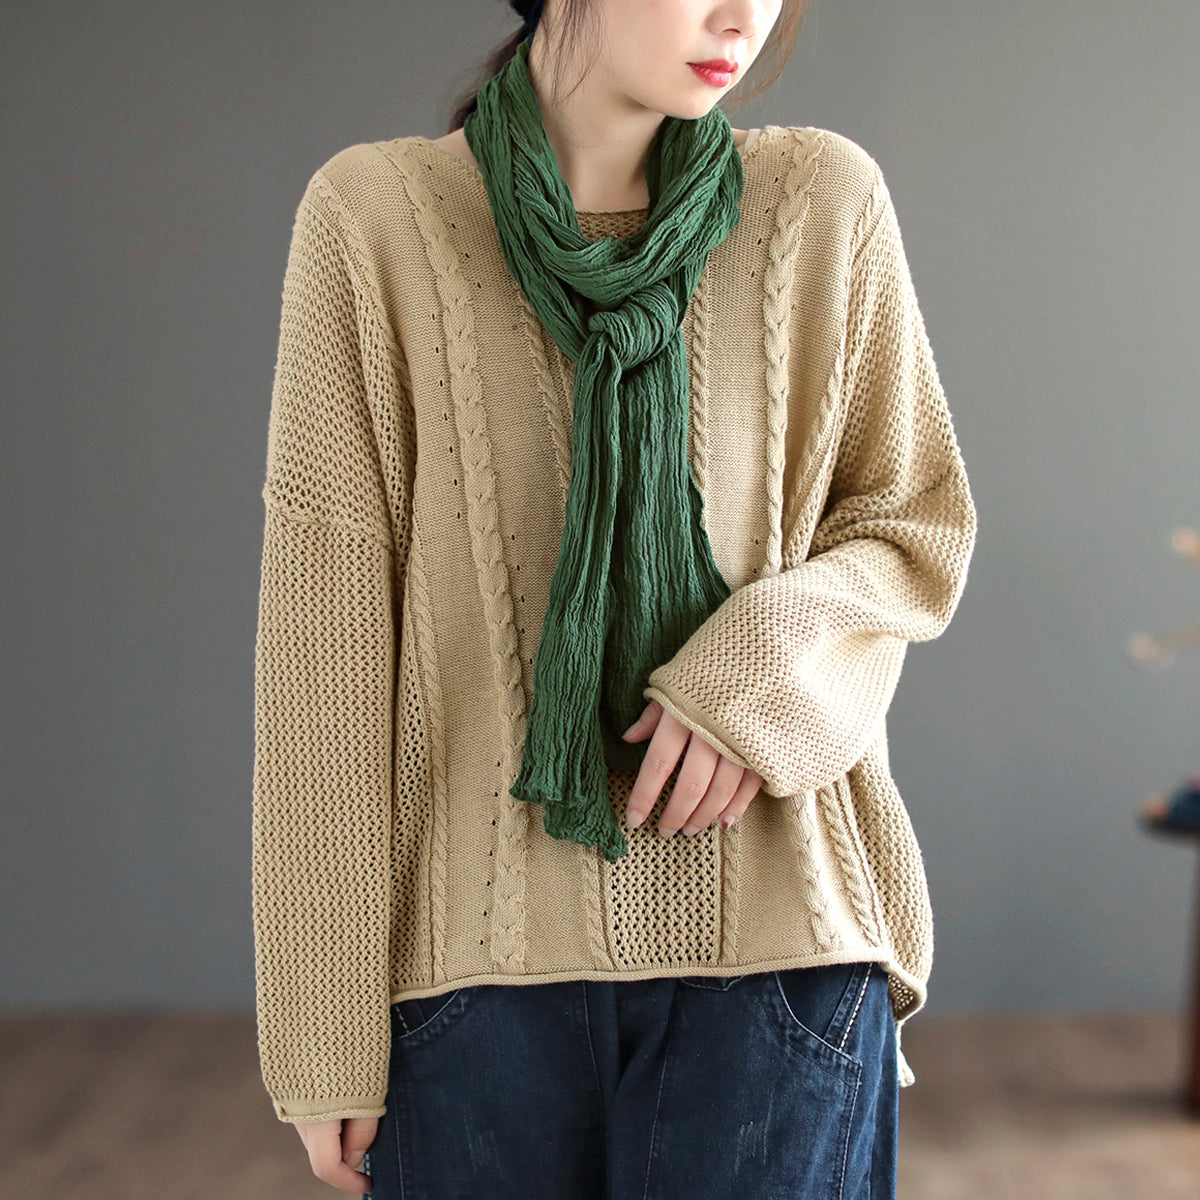 Women Retro Loose Cotton Knitted Sweater Plus Size Aug 2022 New Arrival One Size Khaki 